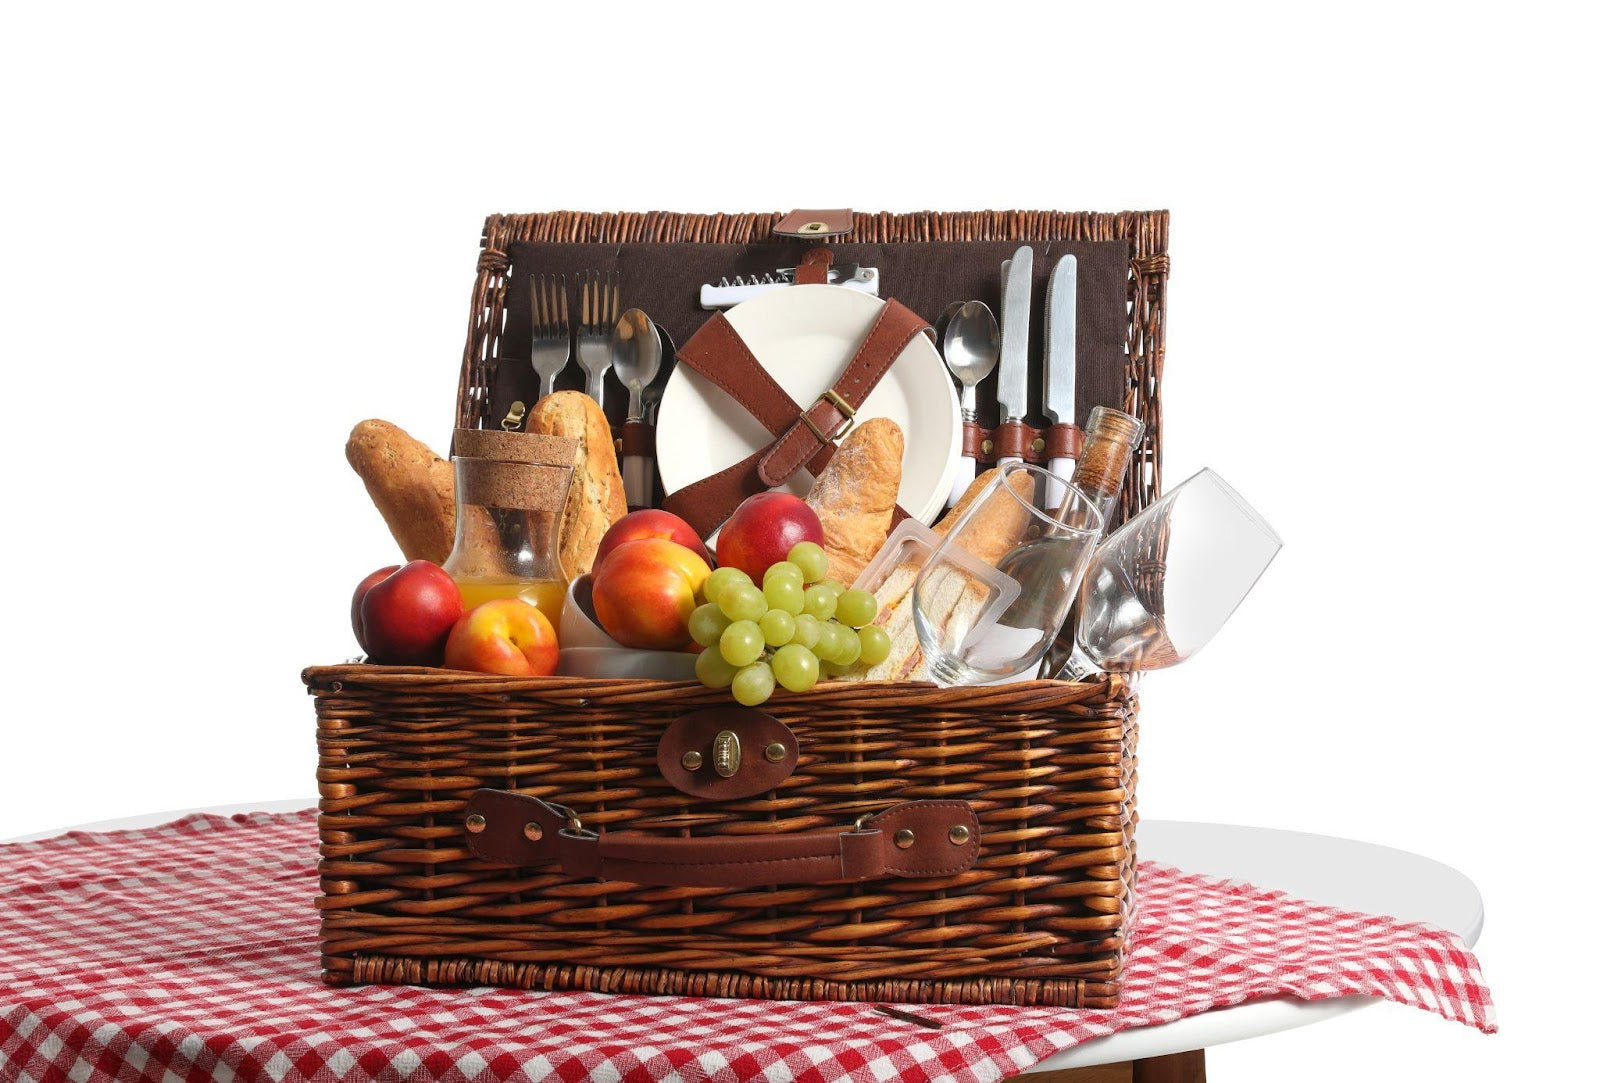 A picnic basket filled with various food items, including freeze-dried candy corn, marshmallow, and candy.